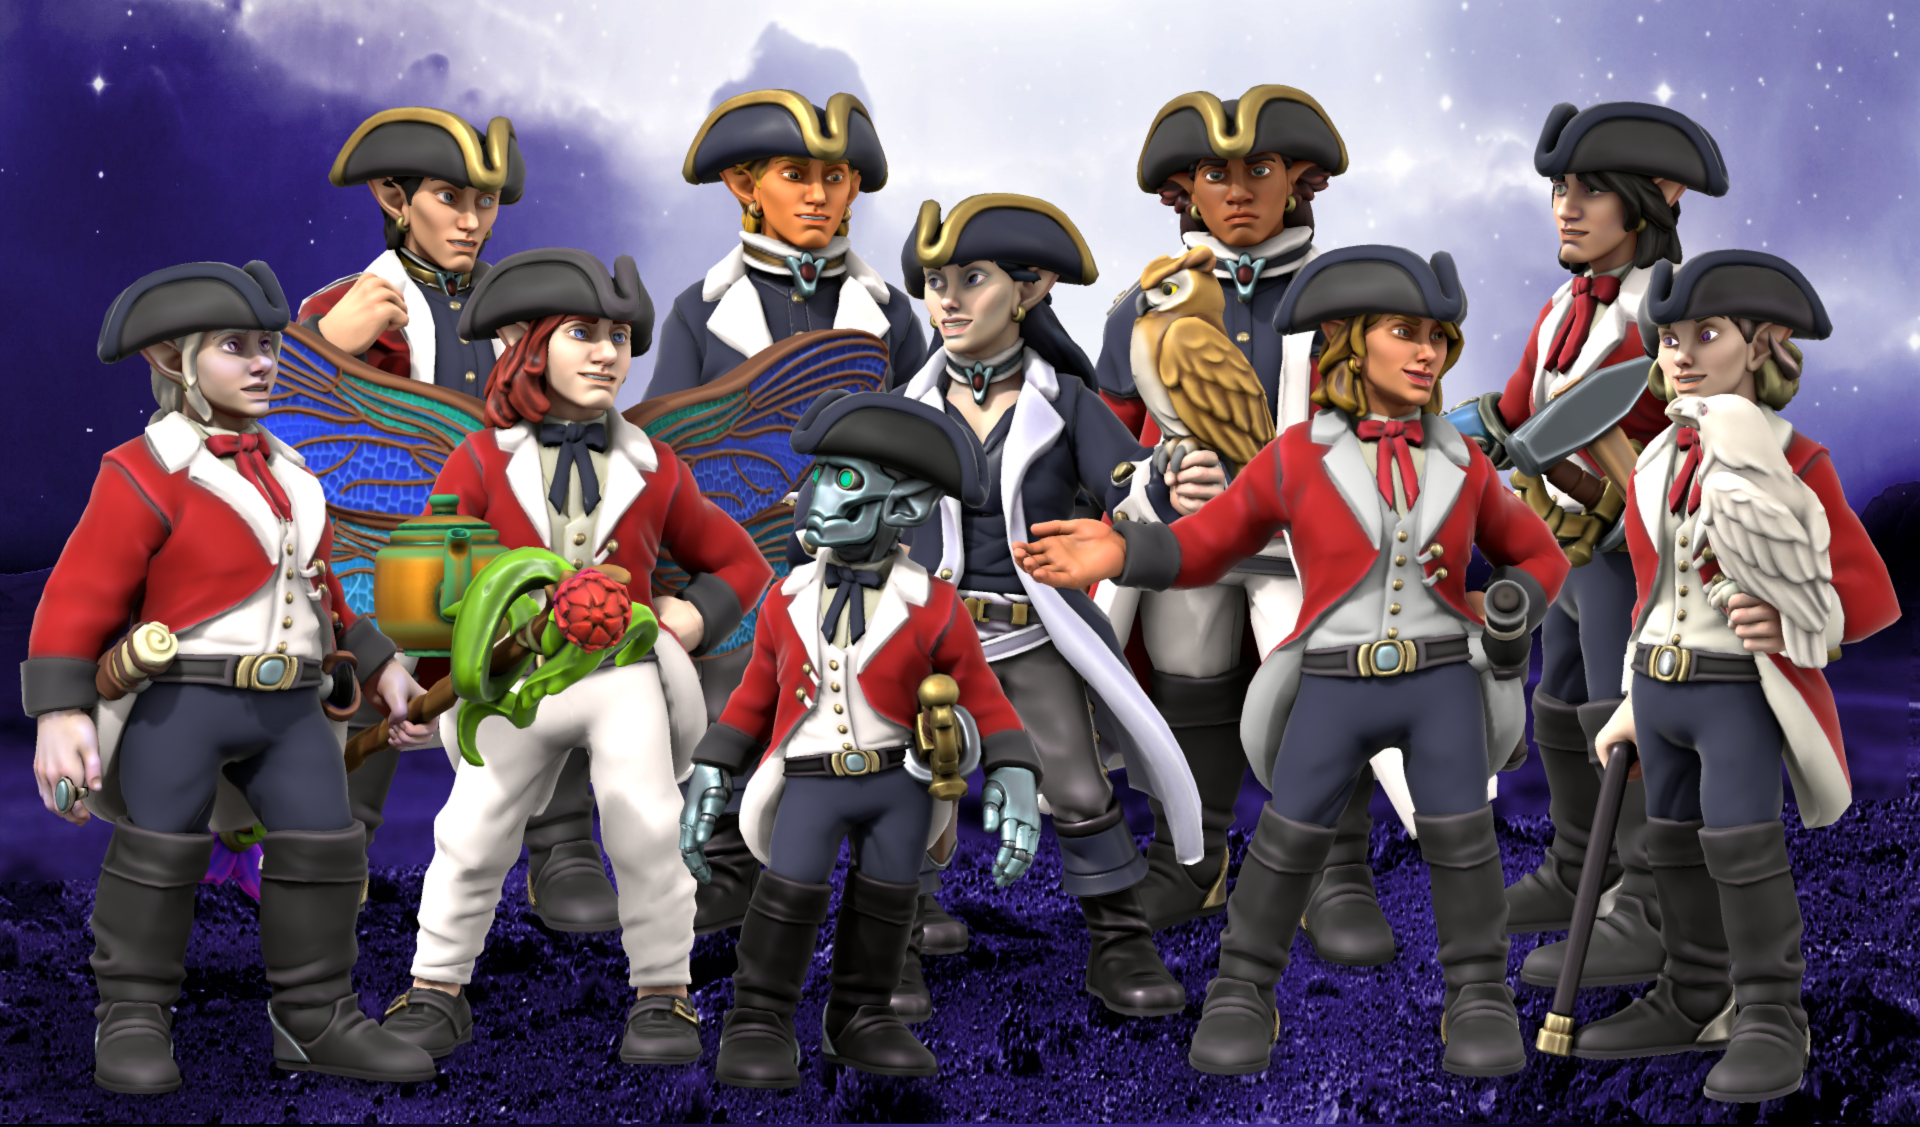 Toy Soldiers Group Campaign